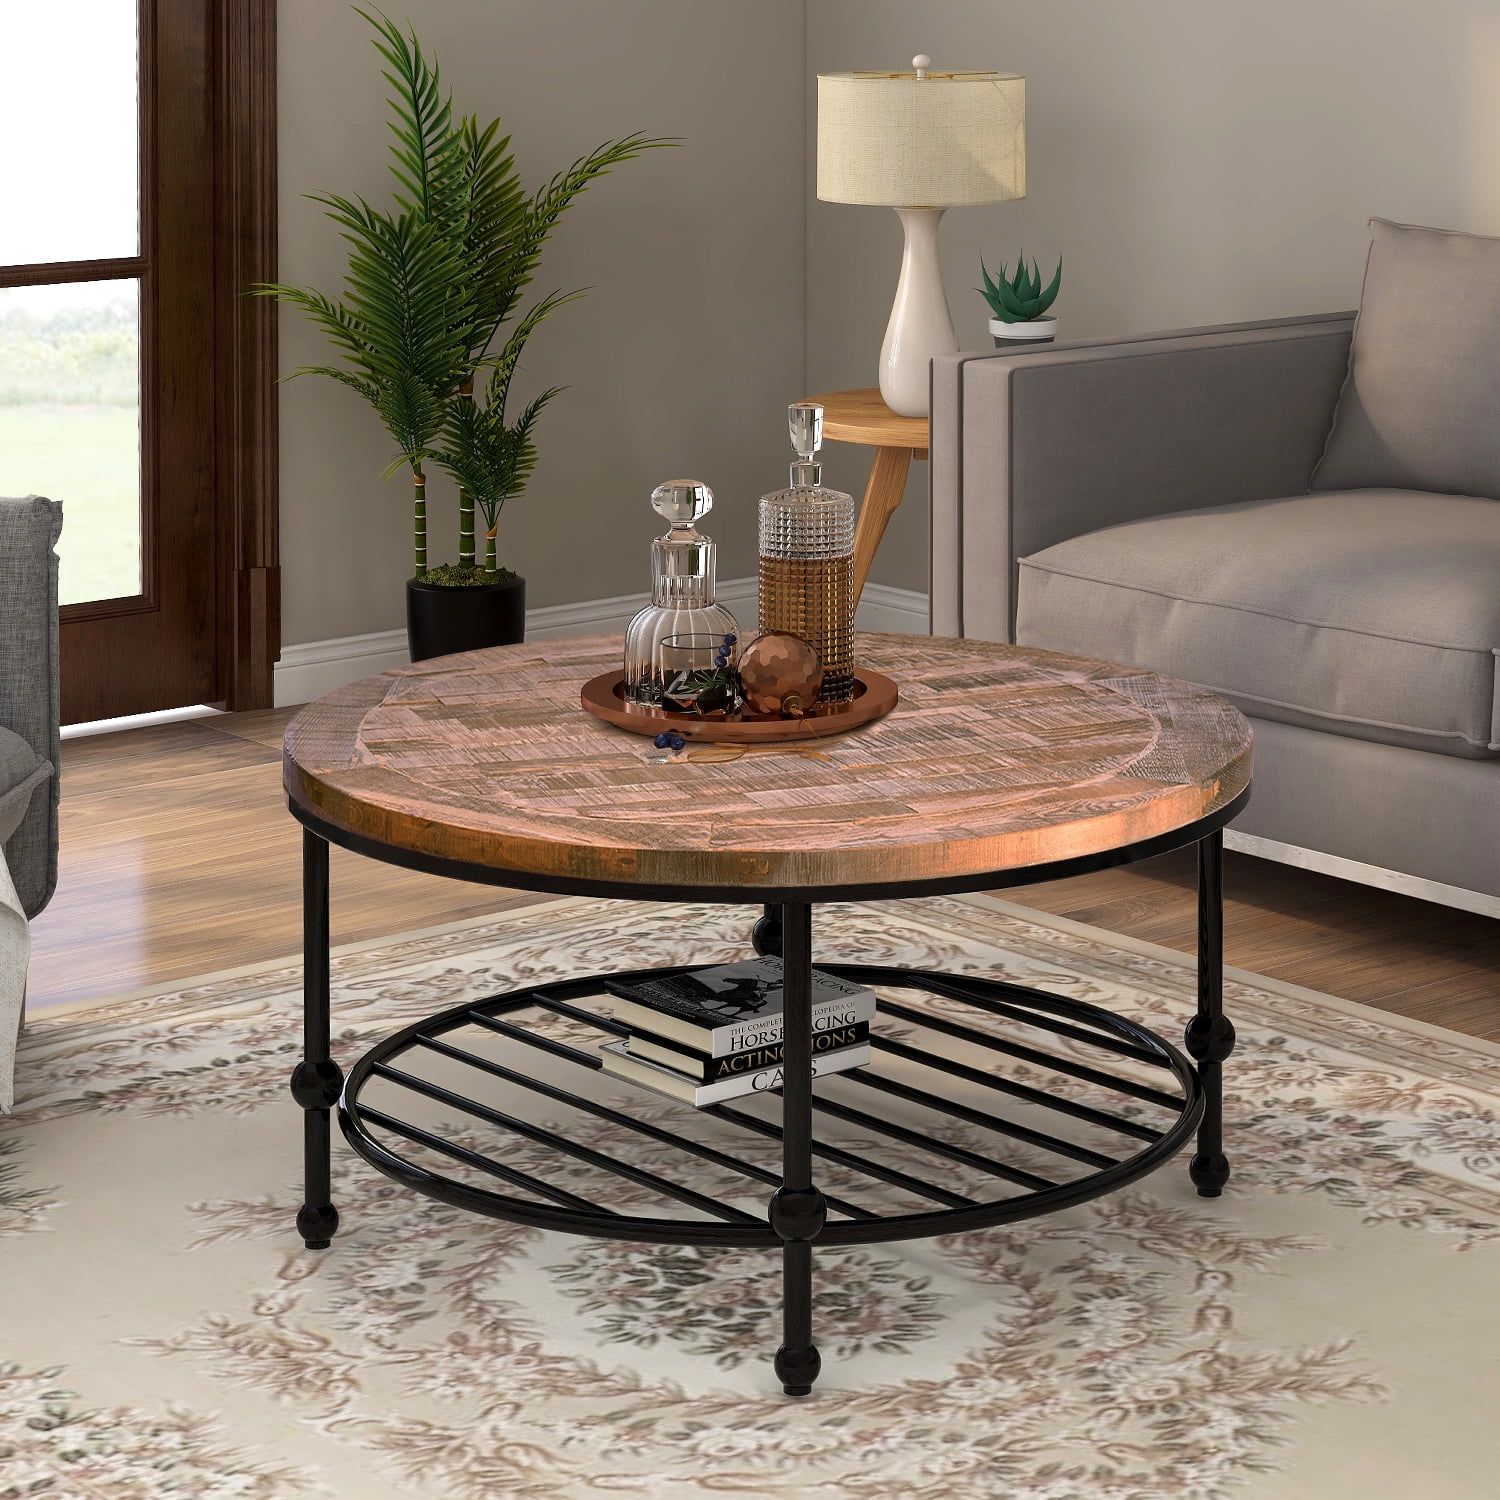 Rustic Natural Round Coffee Table With Storage Shelf For Living Room Throughout Outdoor Half Round Coffee Tables (View 19 of 20)